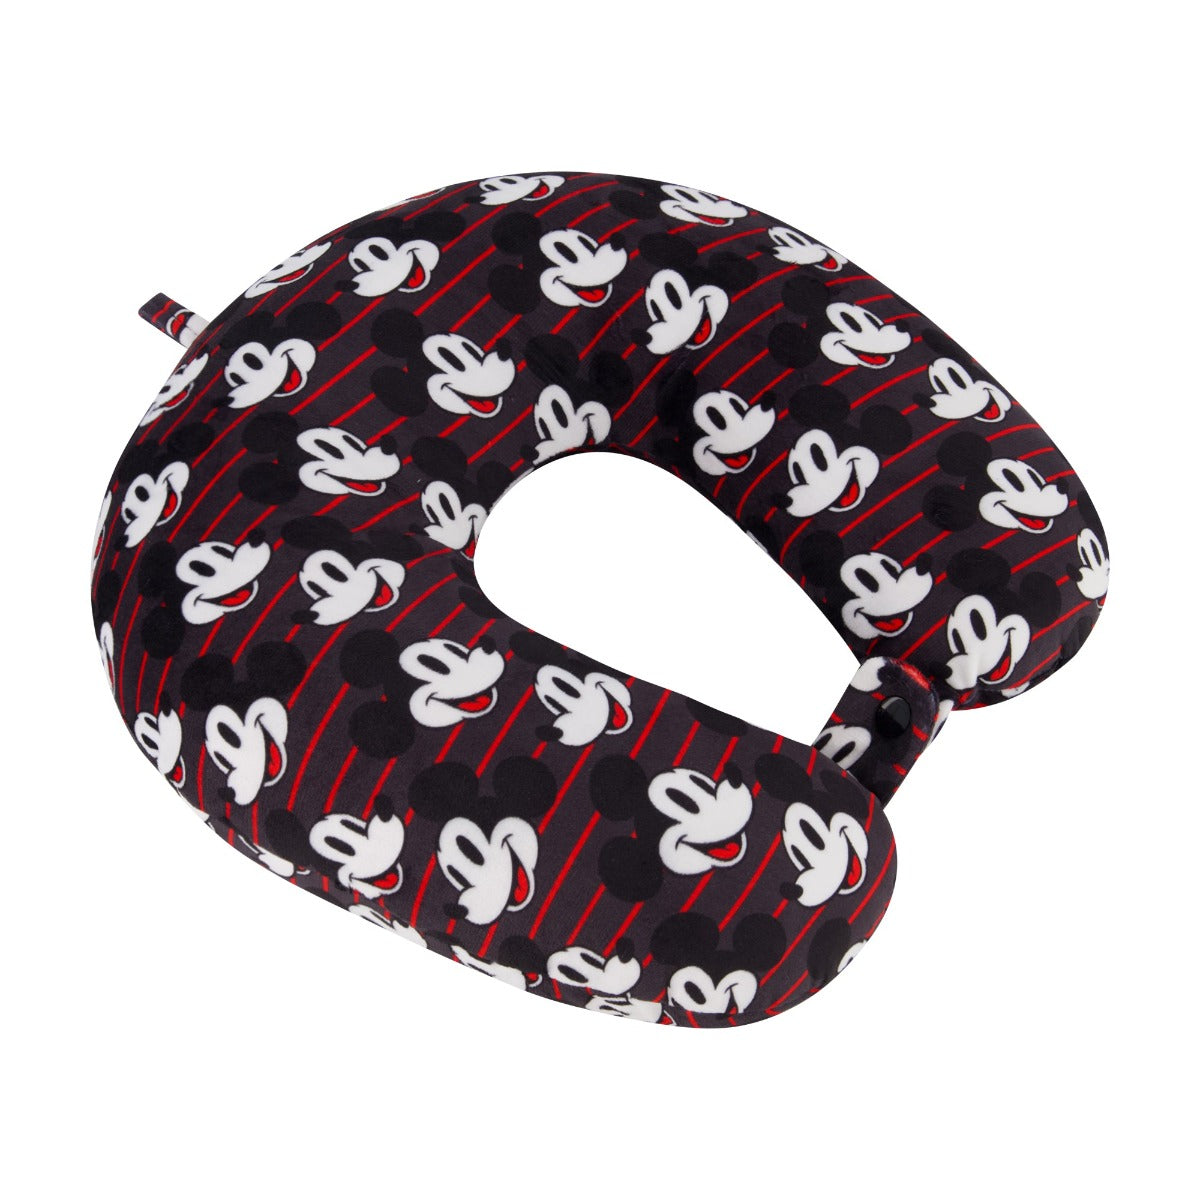 Disney mickey mouse neck pillow red black white - best small travel pillow for comfort